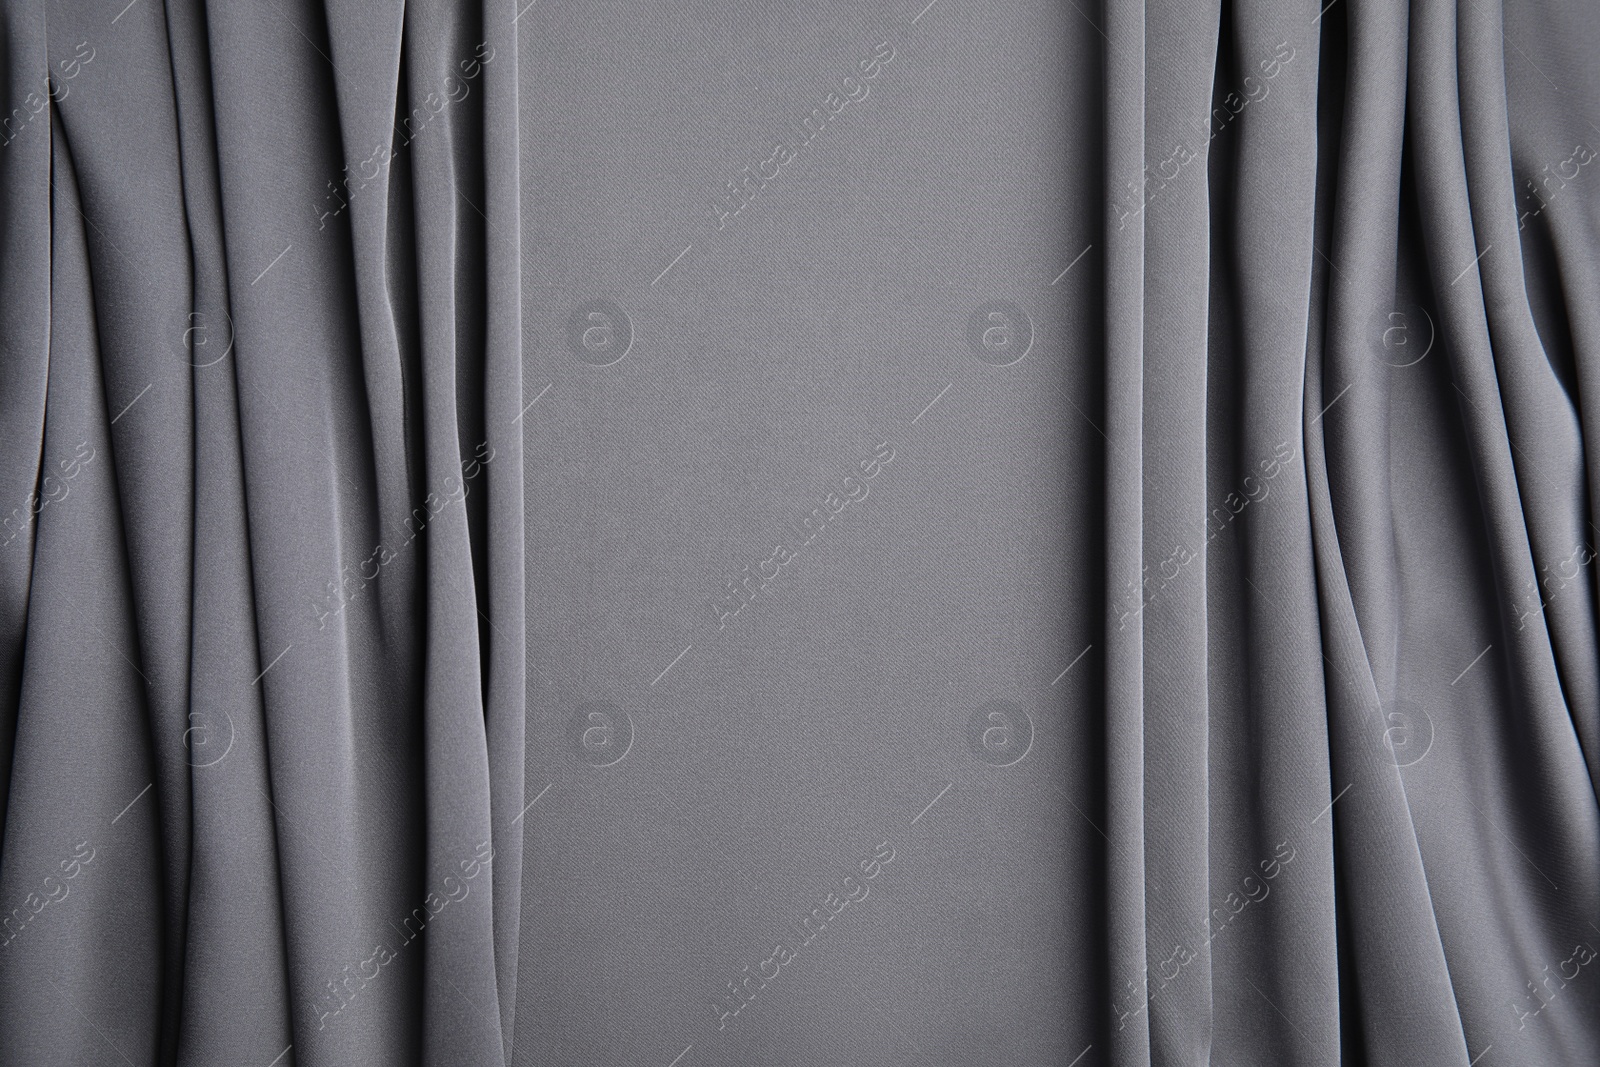 Photo of Texture of delicate black silk as background, top view